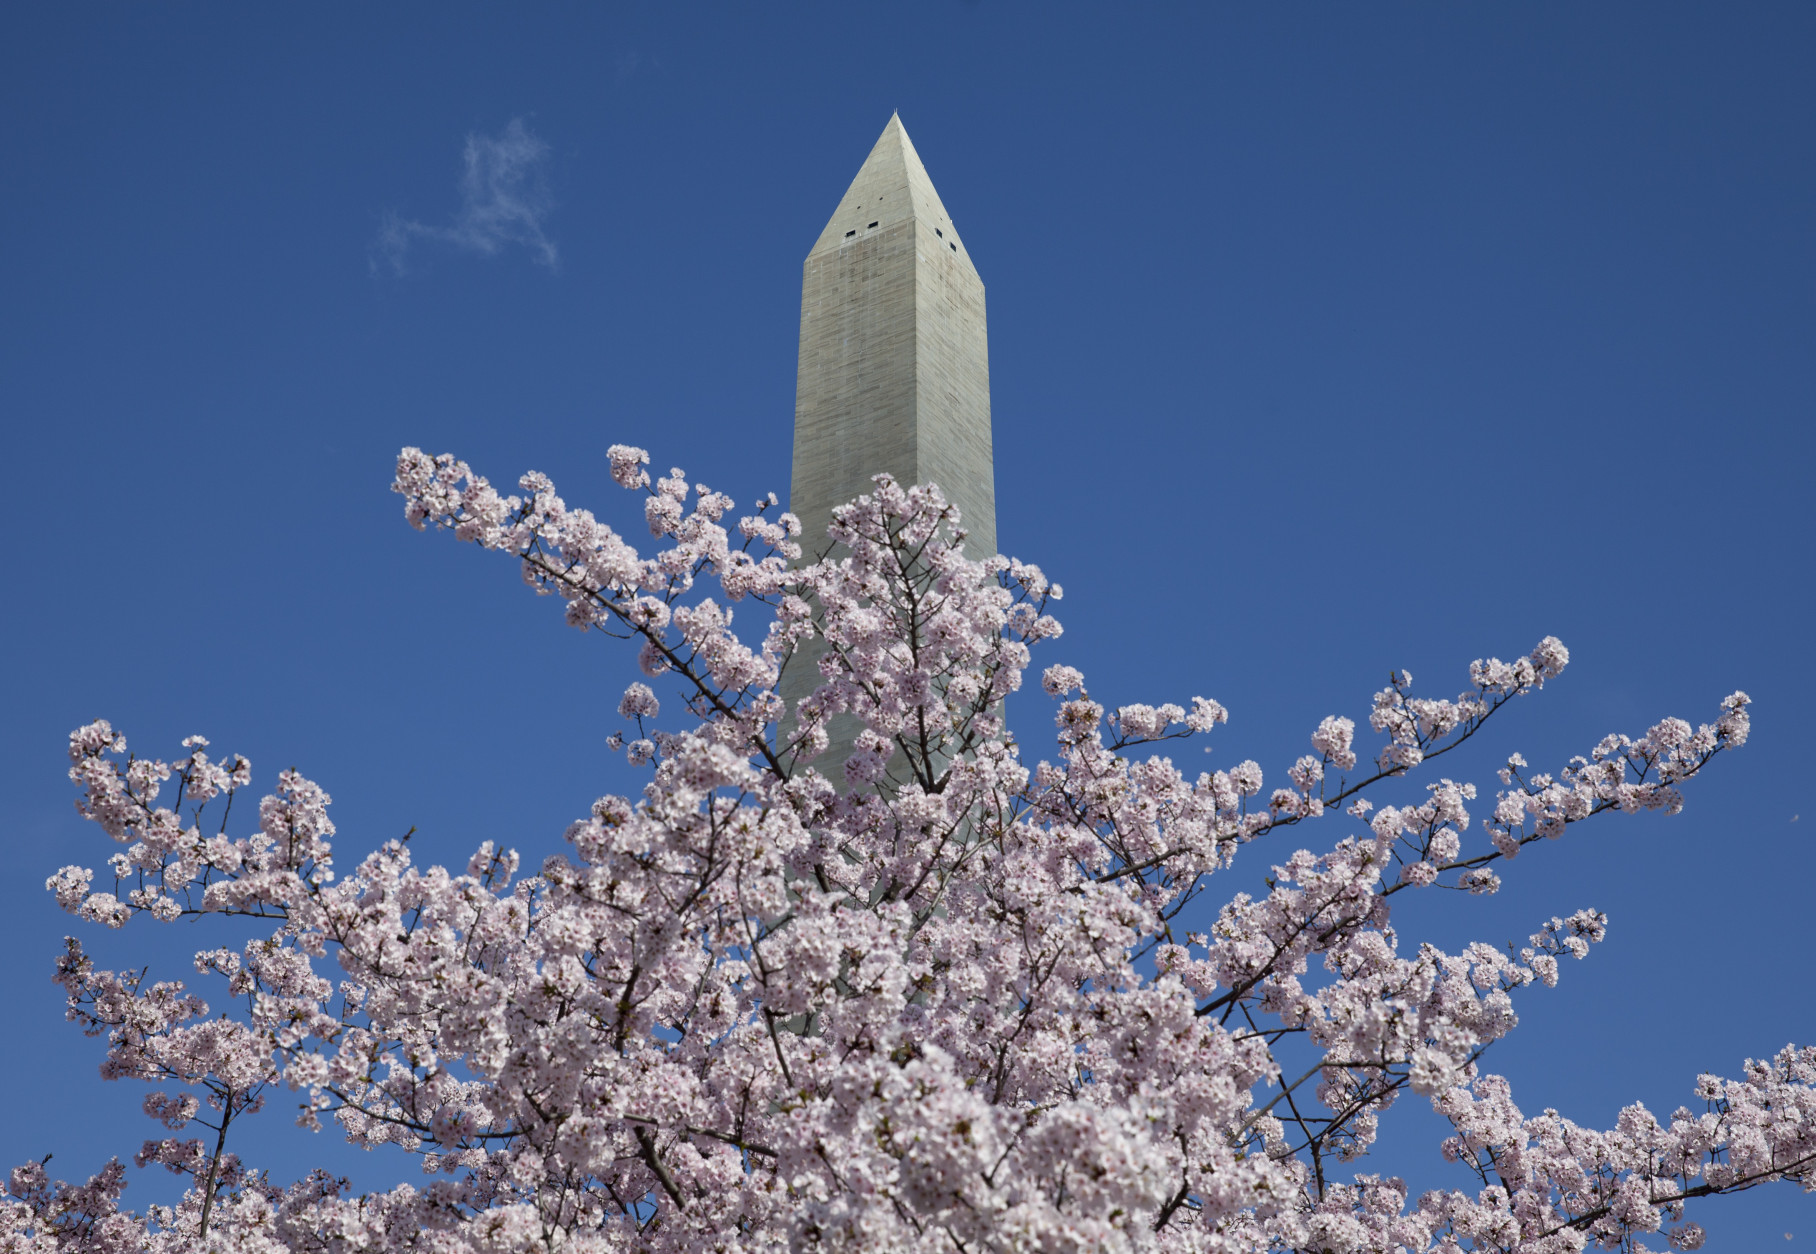 The Washington Monument towers over a cherry tree in full bloom, Saturday, April 11, 2015, in Washington. (AP Photo/Carolyn Kaster)